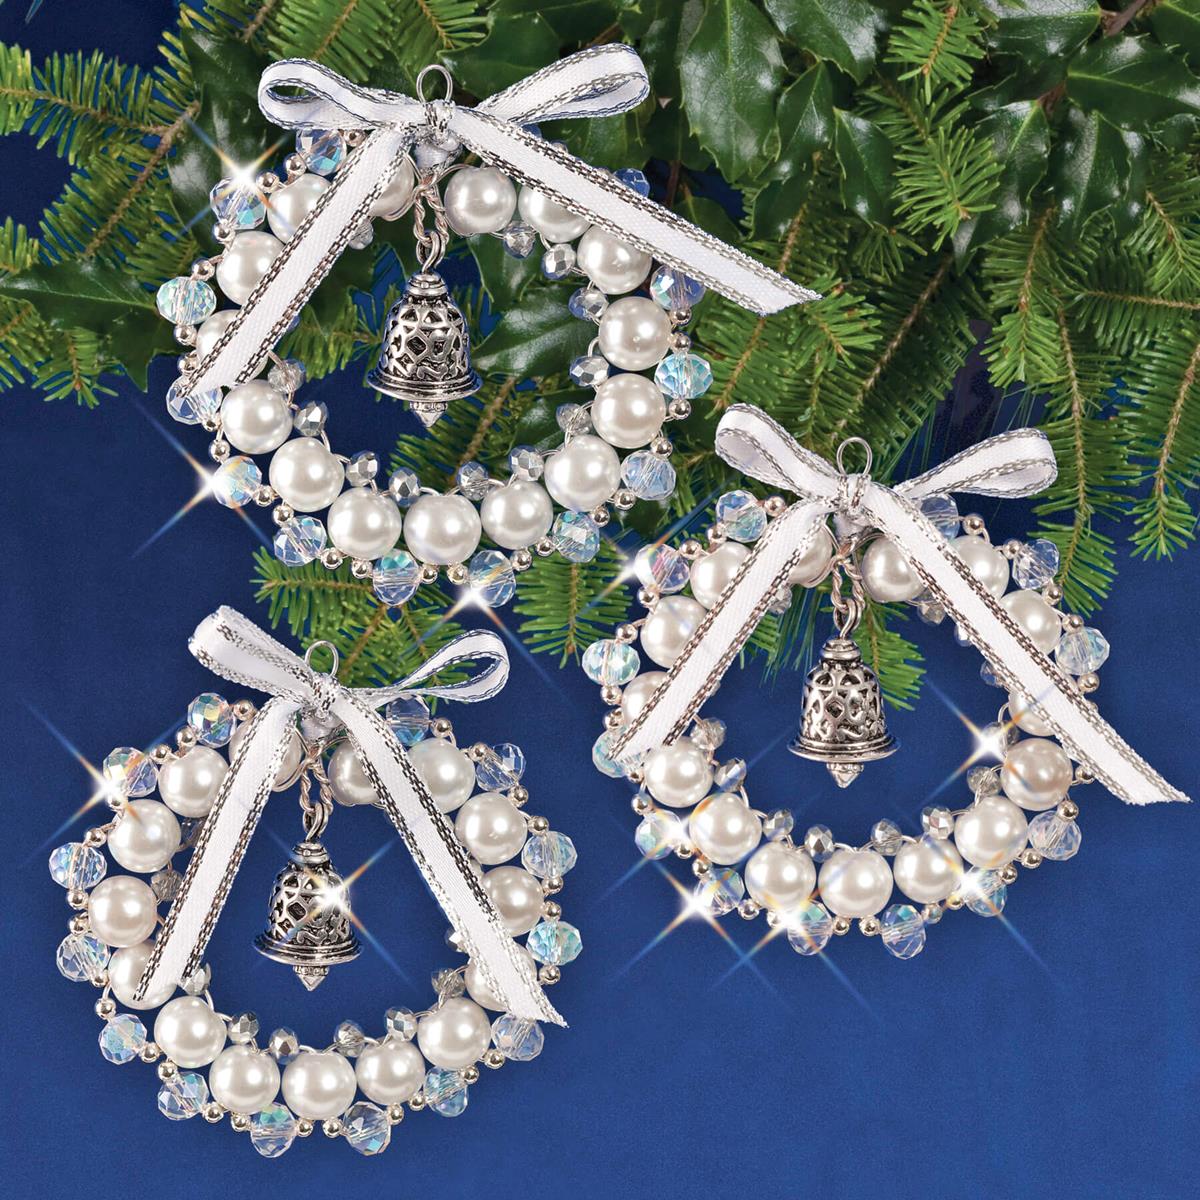 9 Amazing Beaded Ornament Kits for 2023